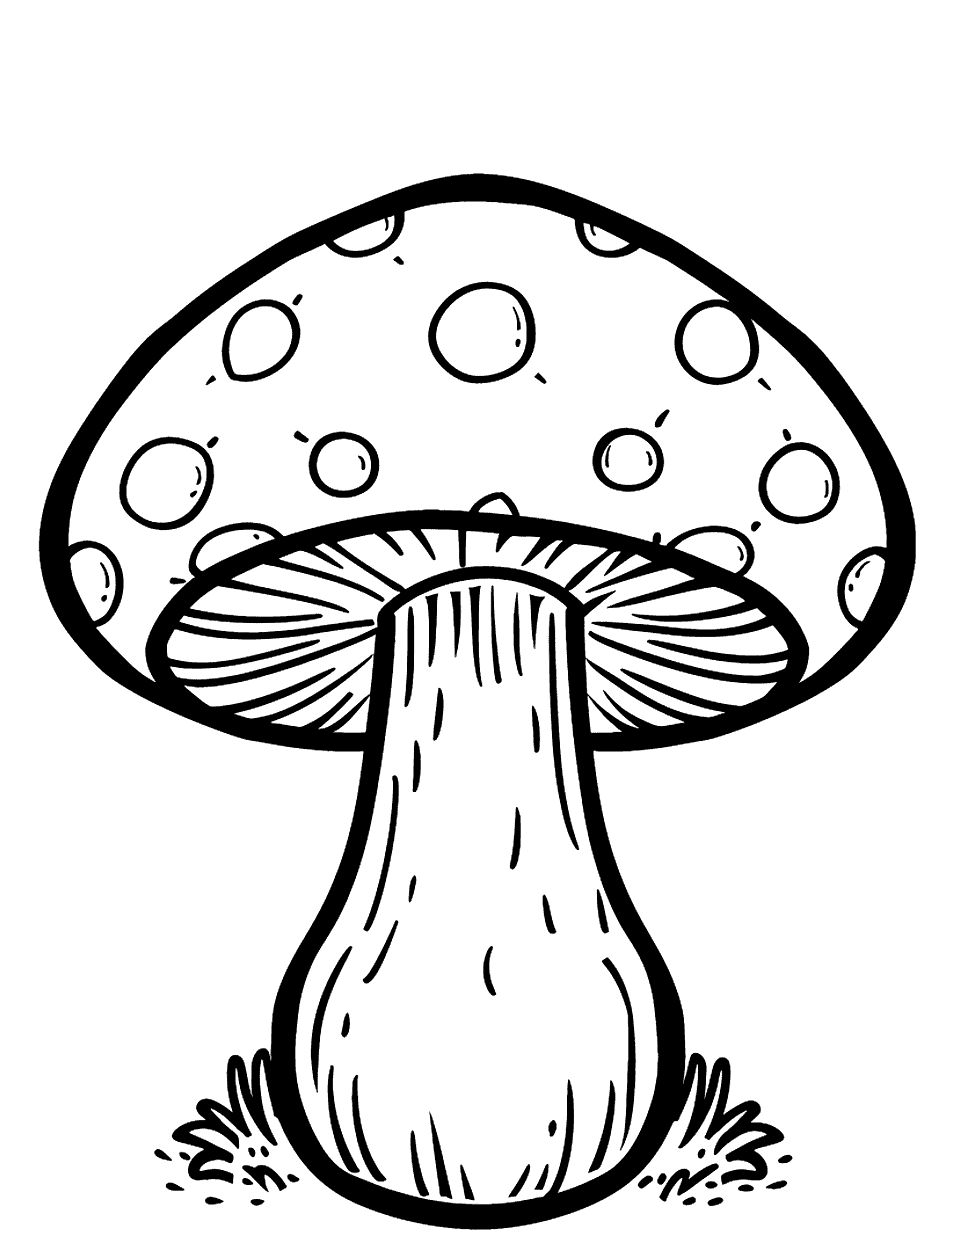 Mario Inspired Mushroom Coloring Page - A bright red mushroom with white spots, reminiscent of the iconic Mario games.